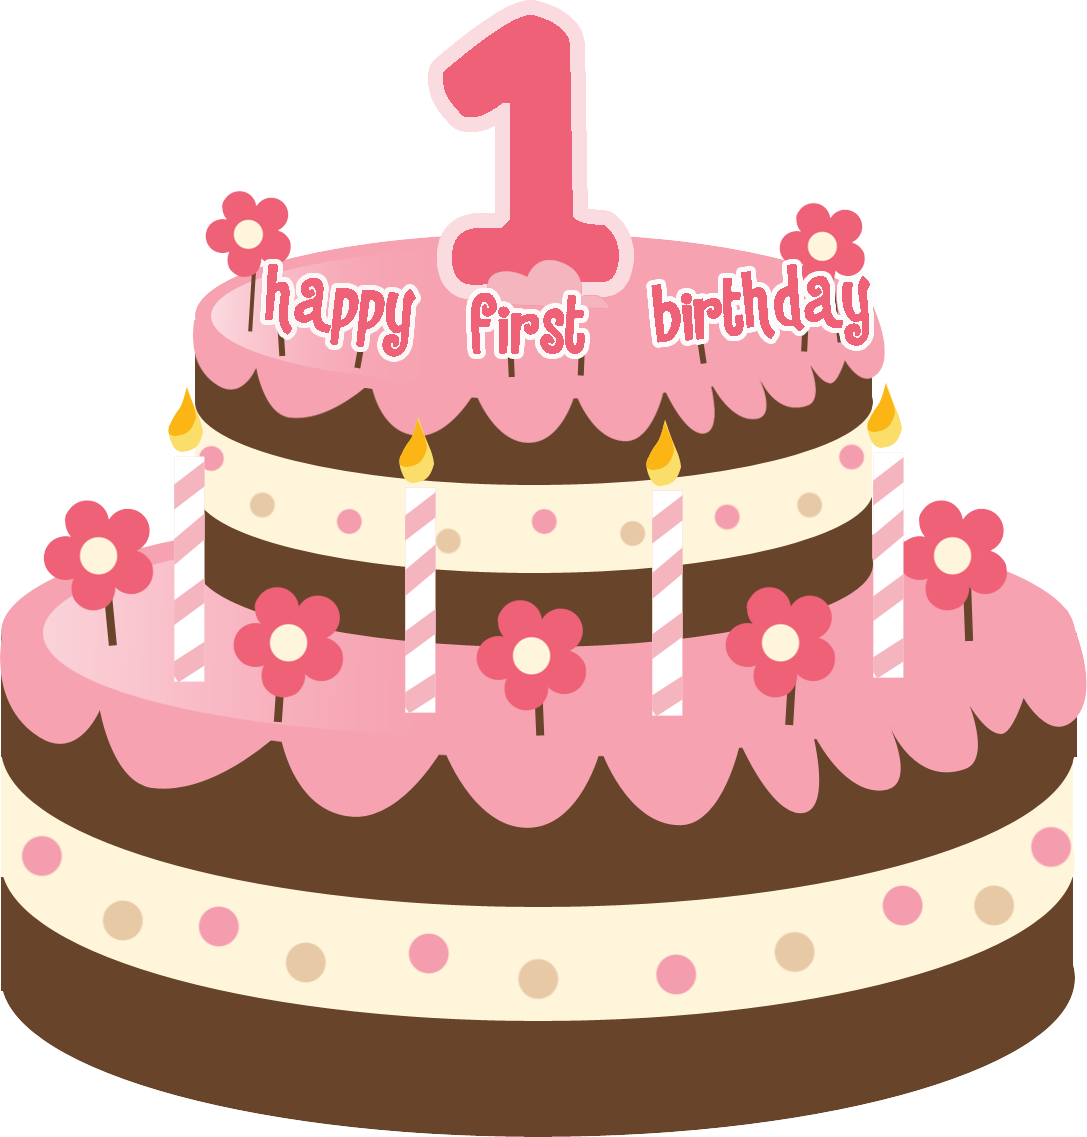 Birthday Cake Png Clipart - Birthday Cake Clipart, Transparent background PNG HD thumbnail